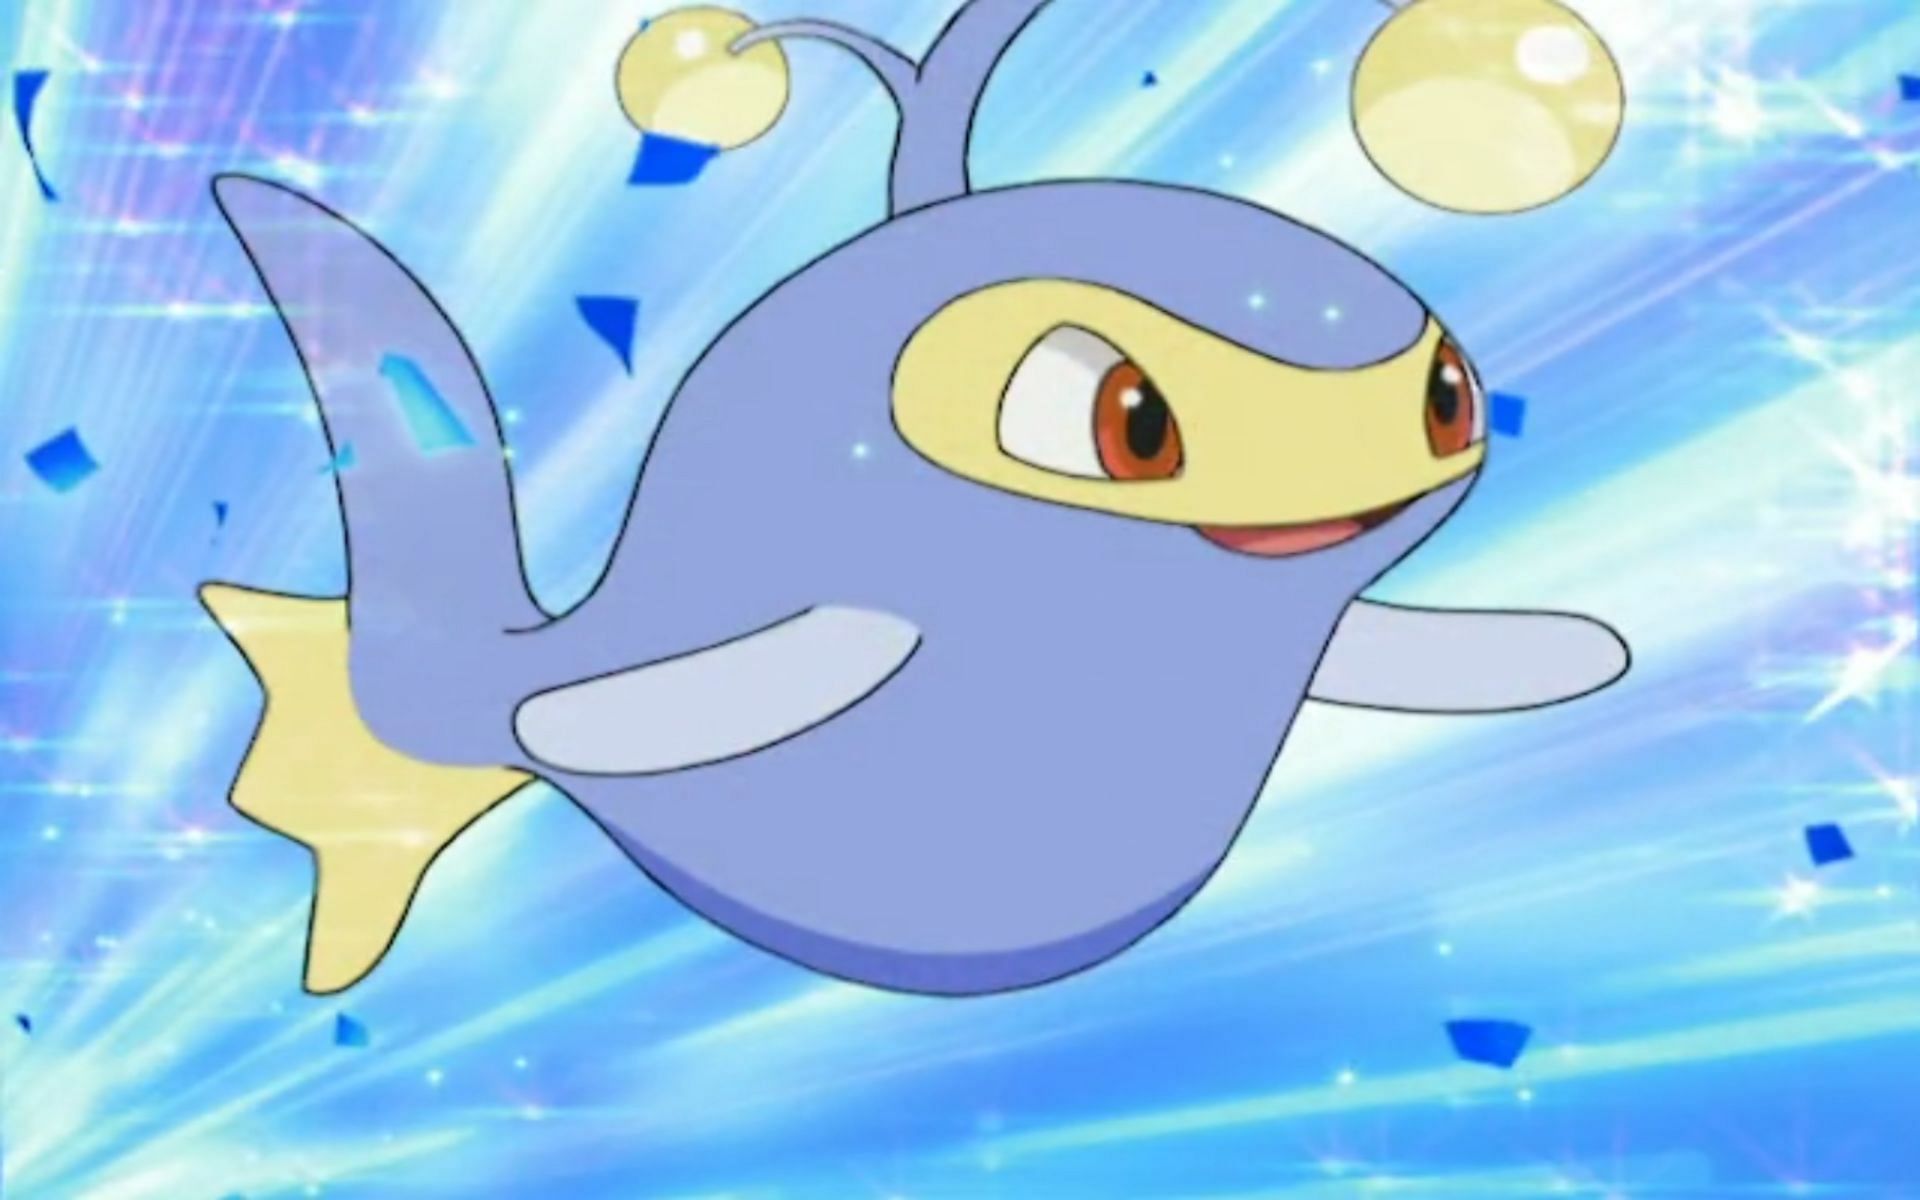 Lanturn is native to the waters in the Johto region (Image via The Pokemon Company)